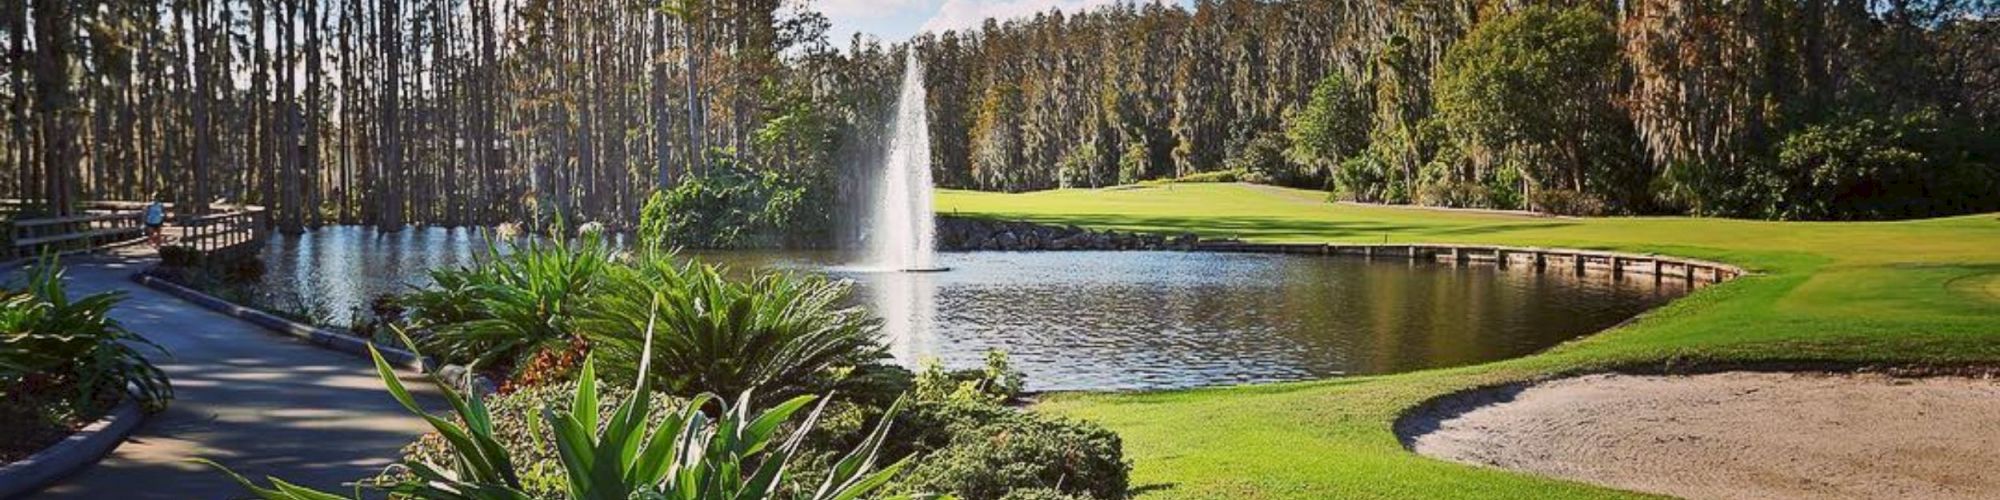 A serene golf course features a lake with a central fountain, surrounded by lush greenery, colorful plants, a bridge, and a sand trap.